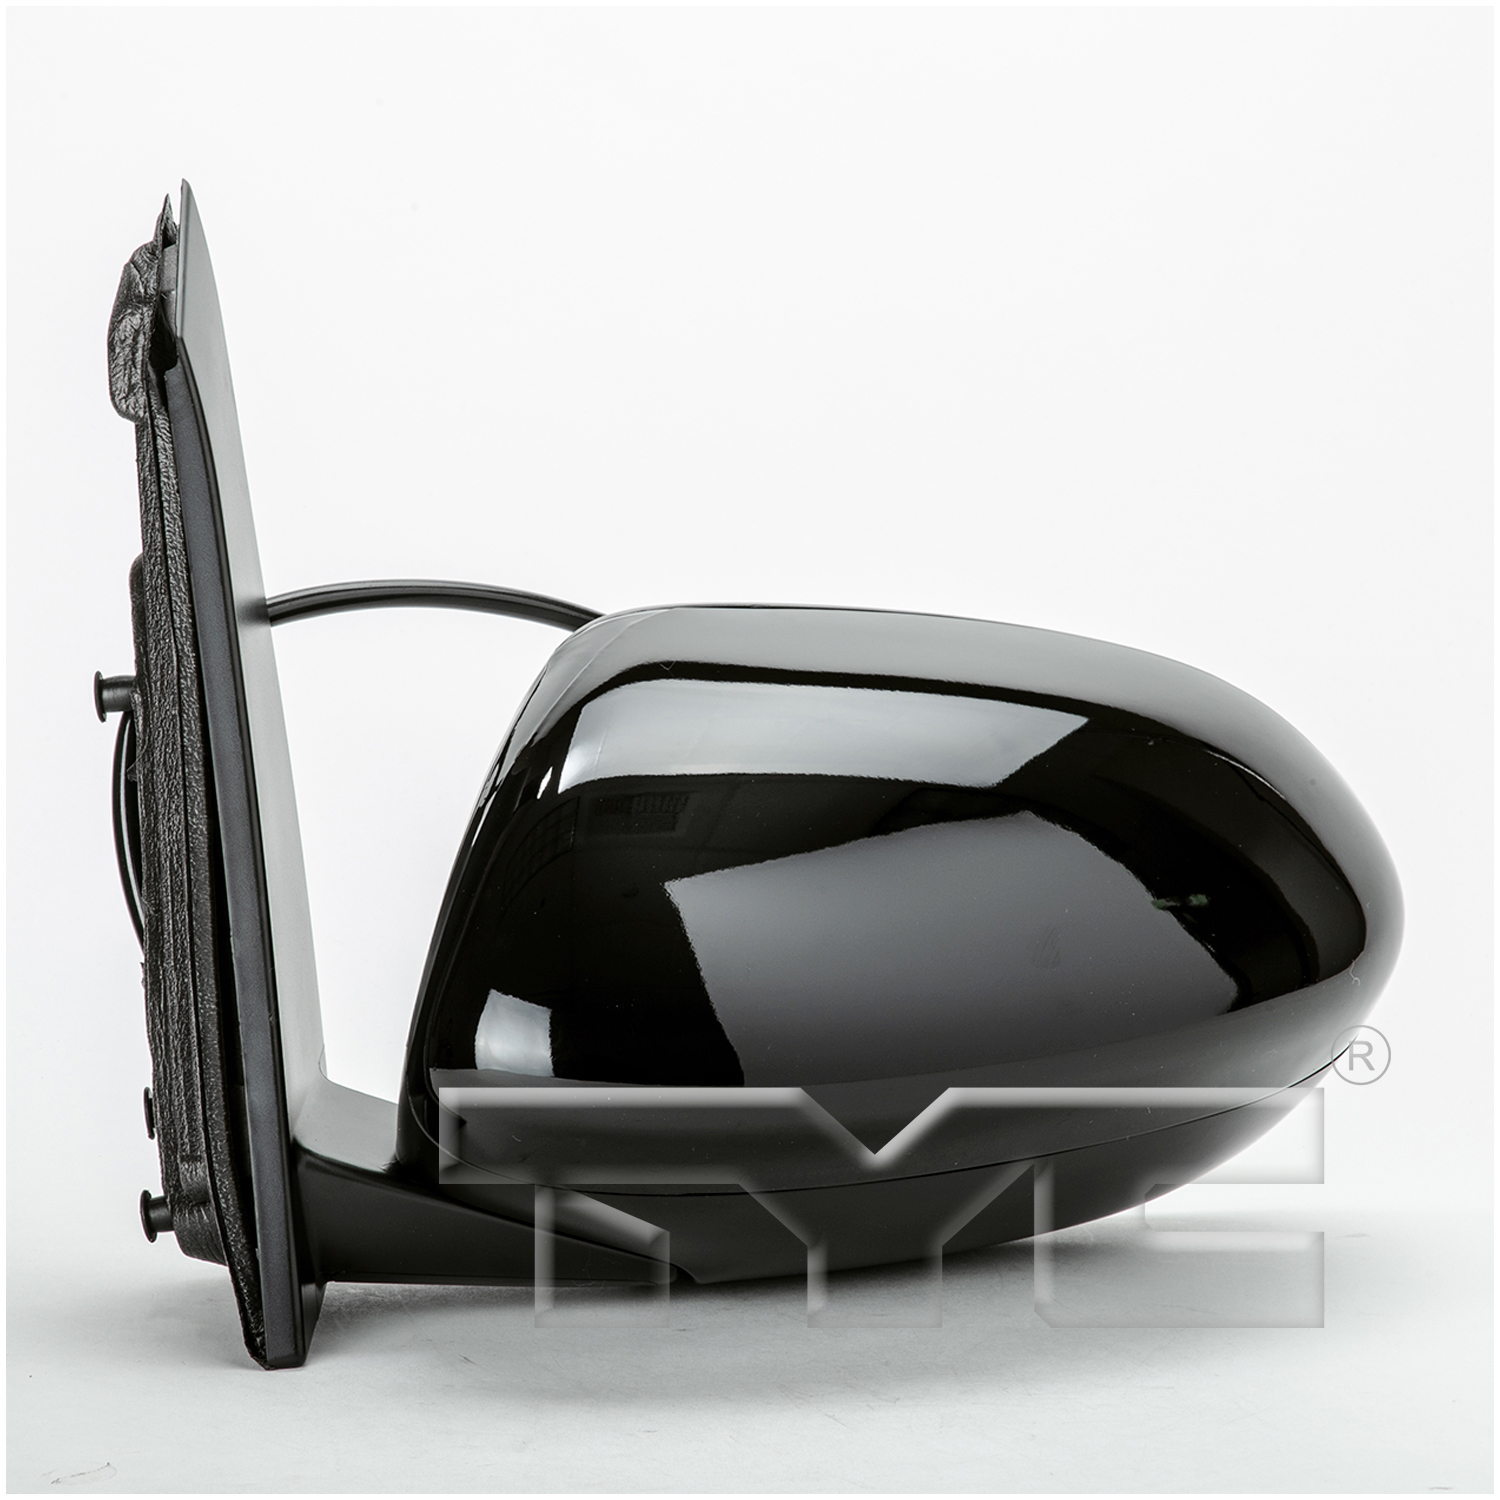 Aftermarket MIRRORS for HONDA - ODYSSEY, ODYSSEY,14-17,LT Mirror outside rear view